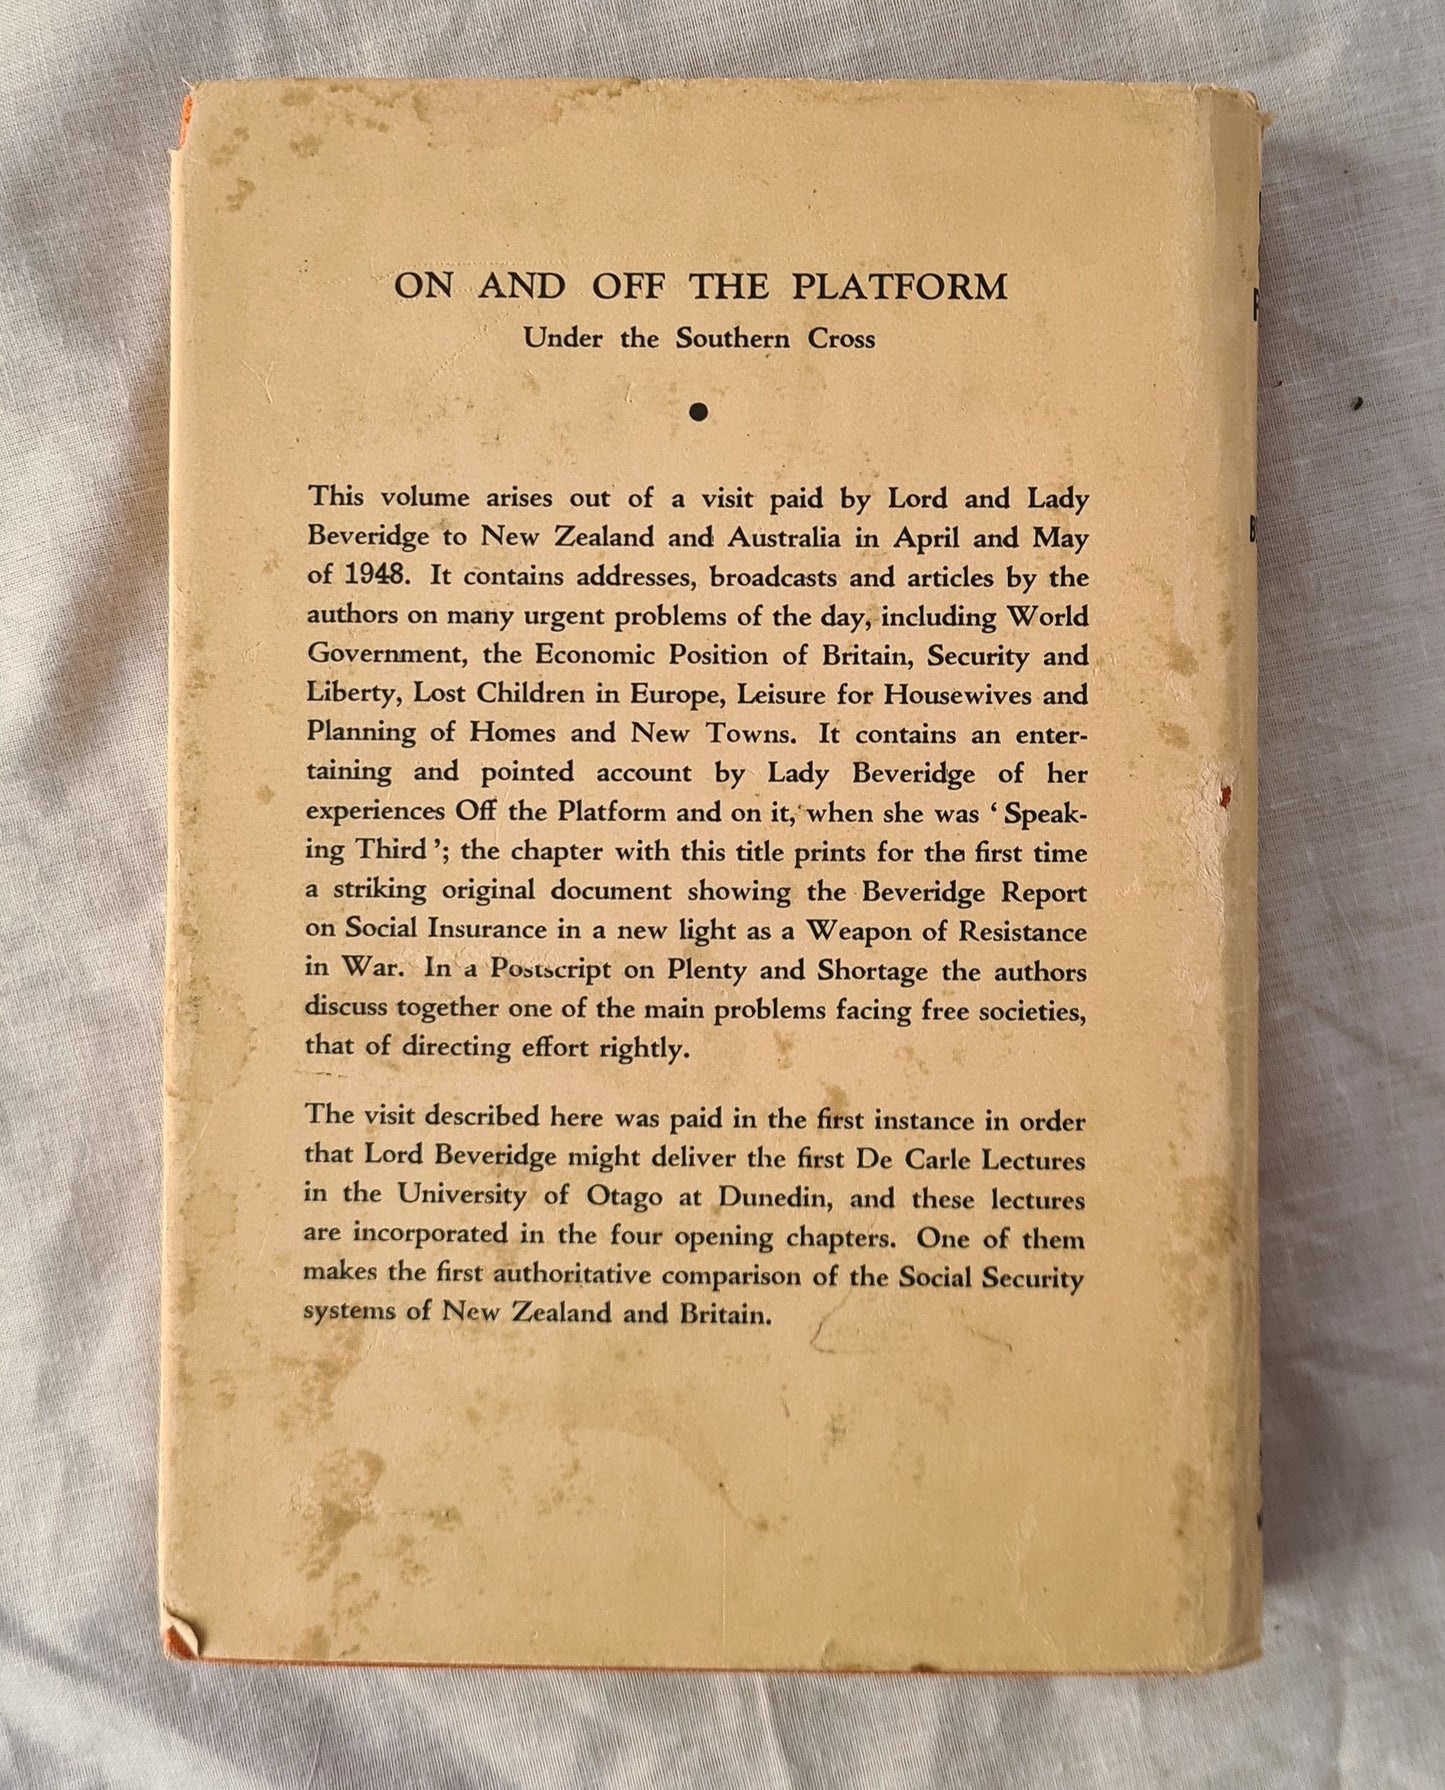 On and Off the Platform by William and Janet Beveridge